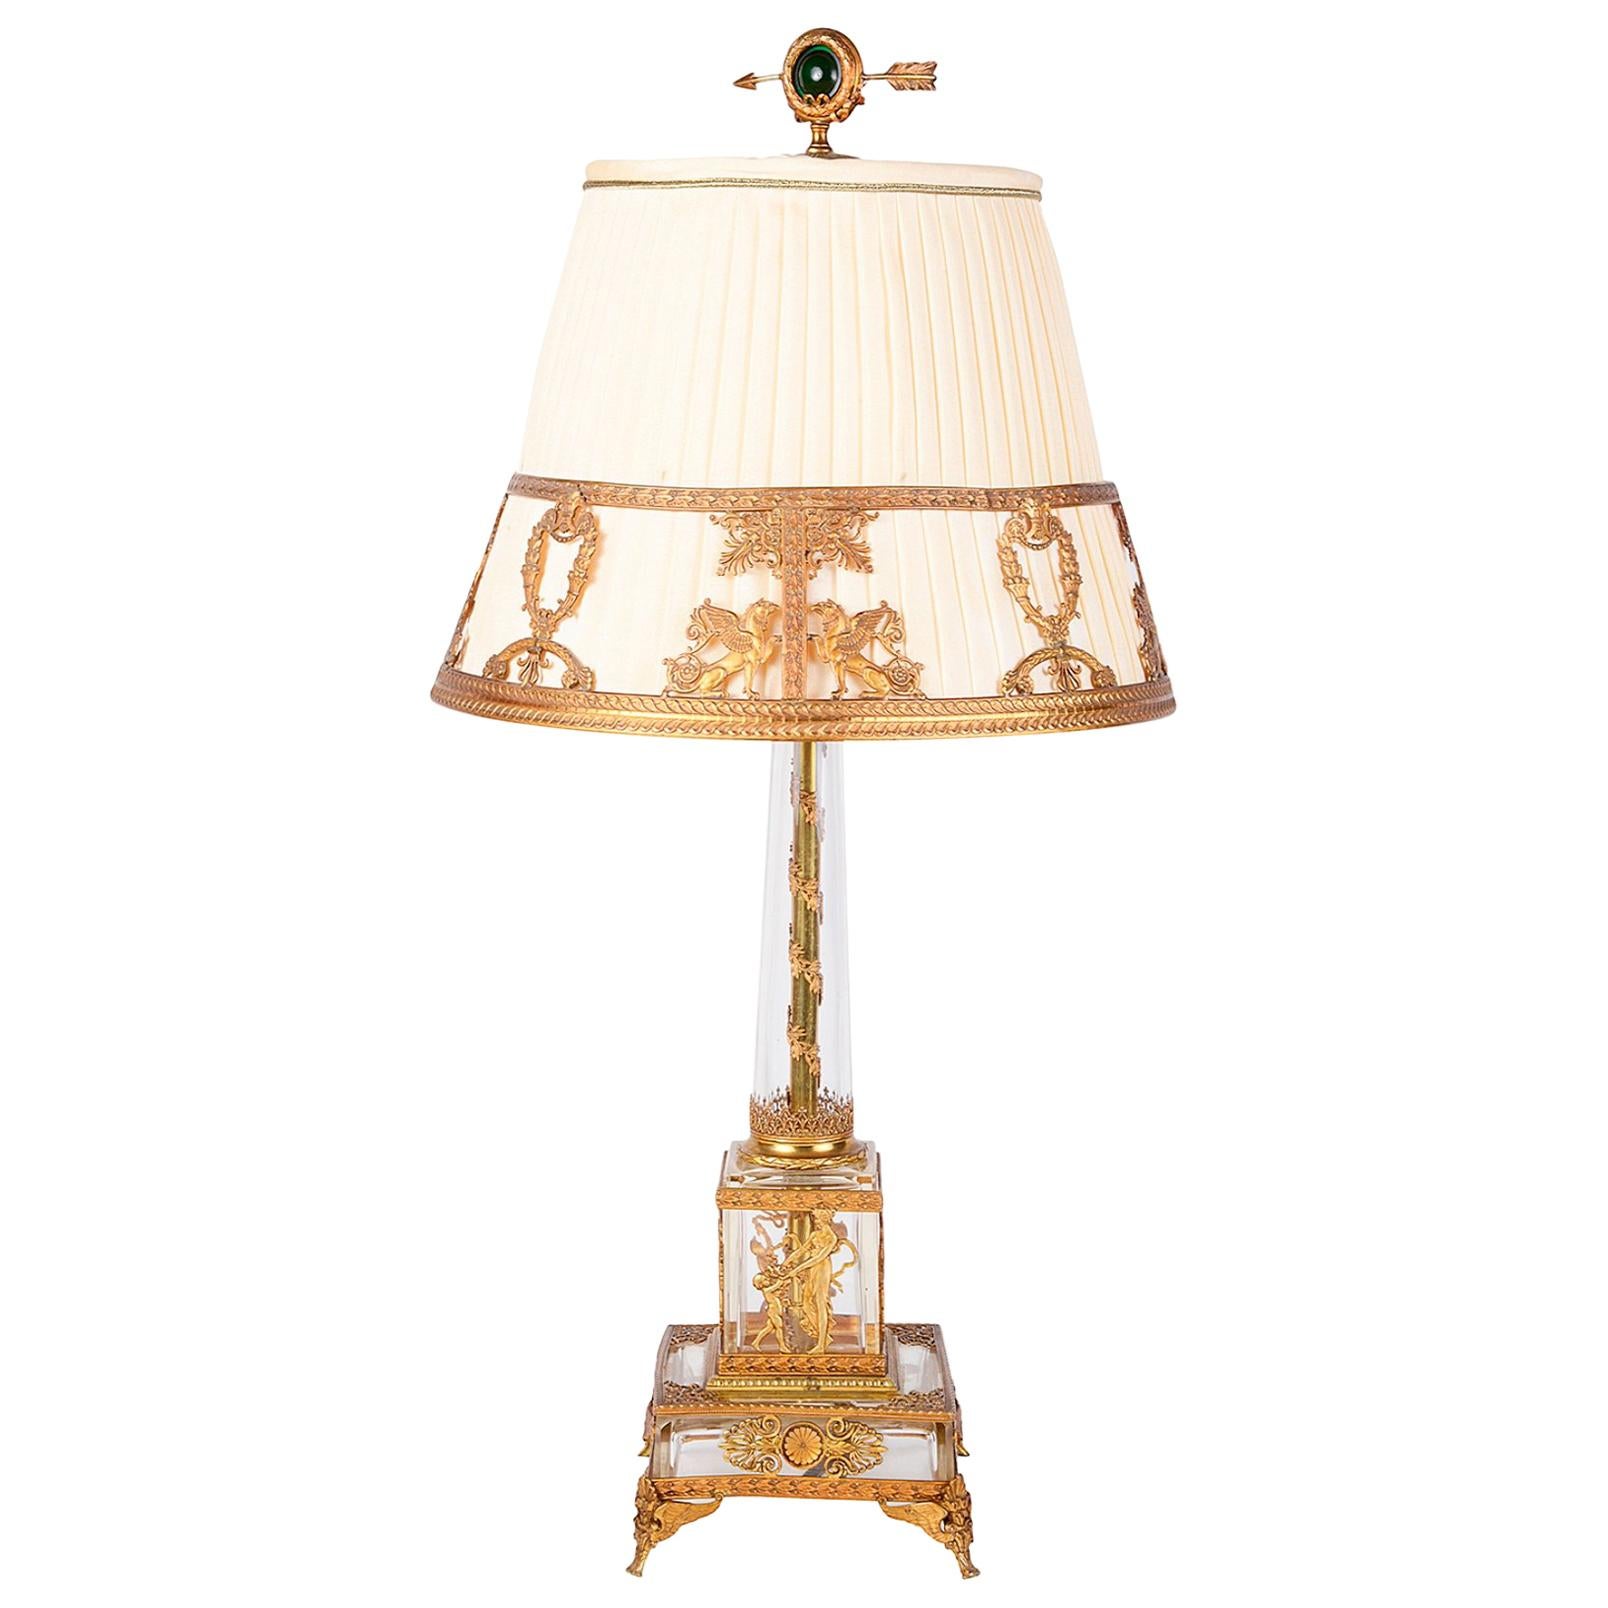 Classical French Empire Style Glass and Ormolu Lamp, circa 1900